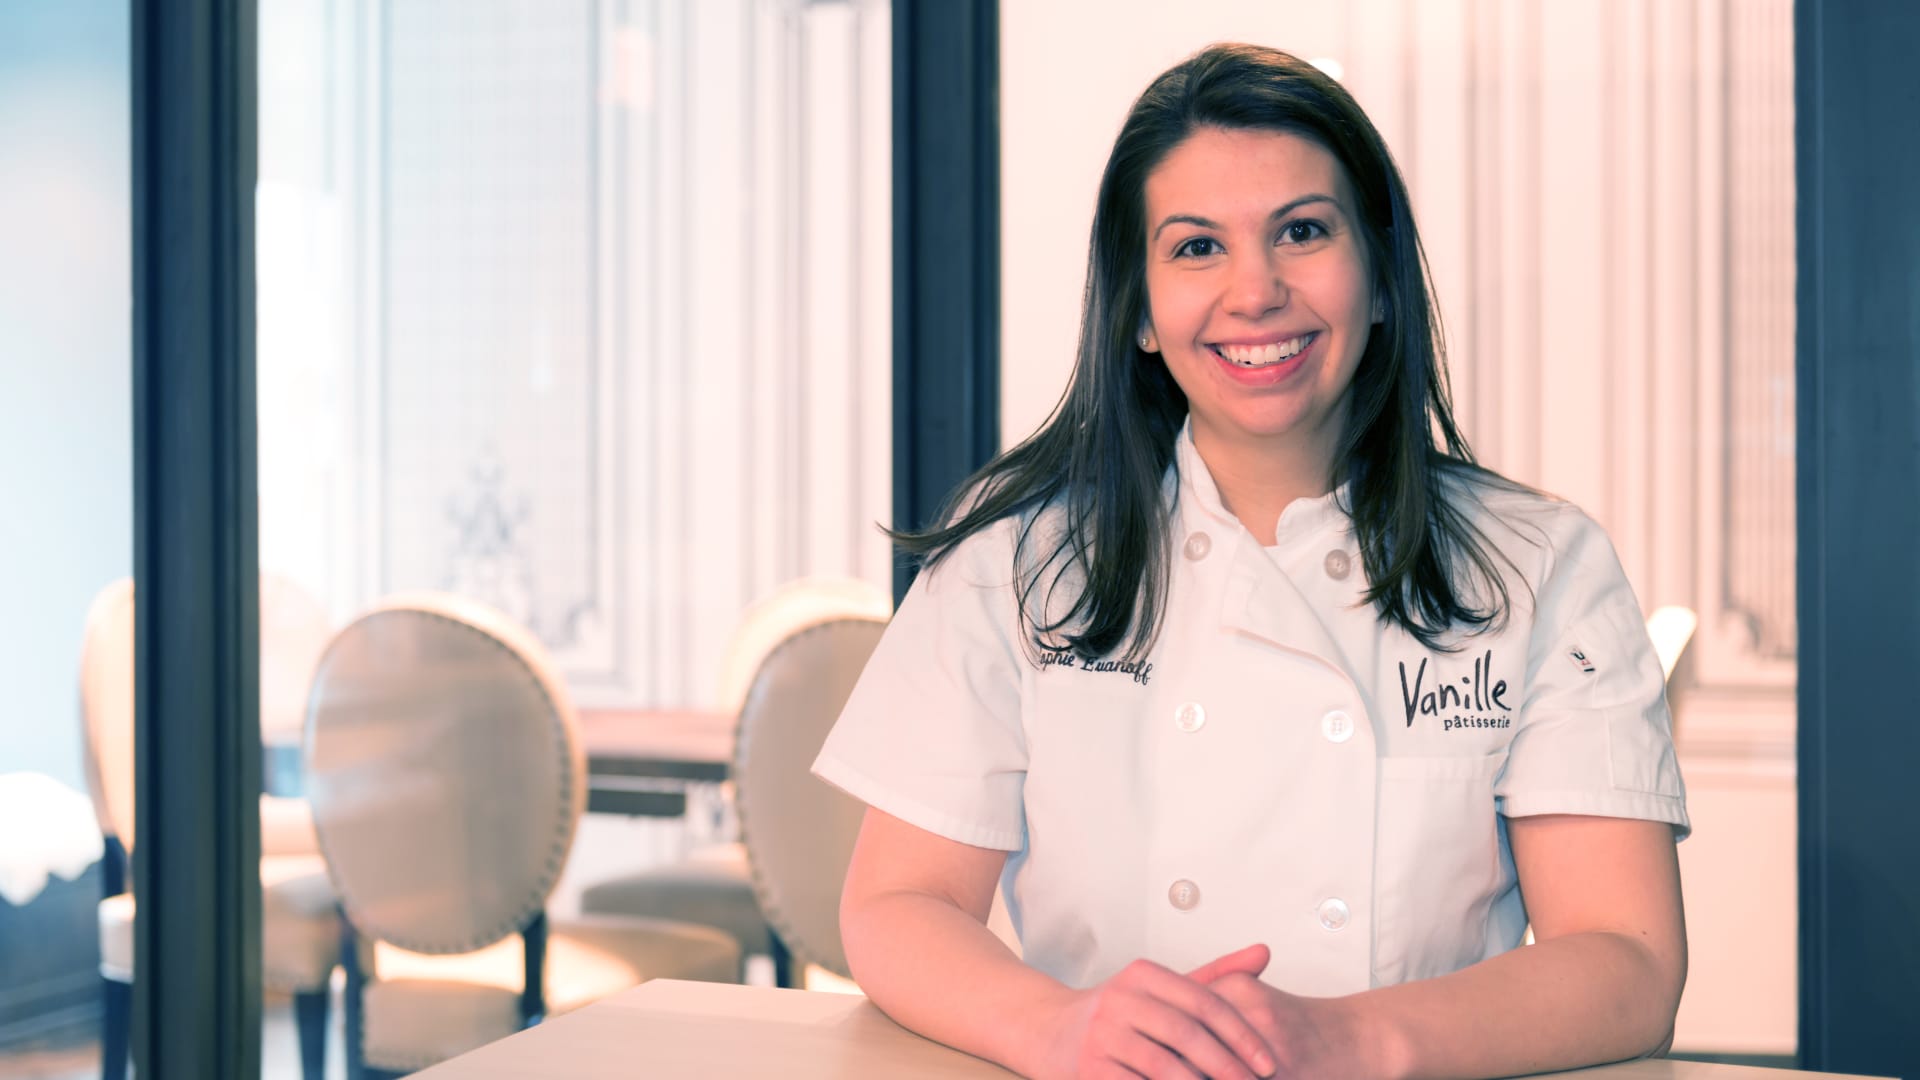 Sophie Evanoff, owner of Vanille Patisserie in Chicago, is having a hard time finding workers.